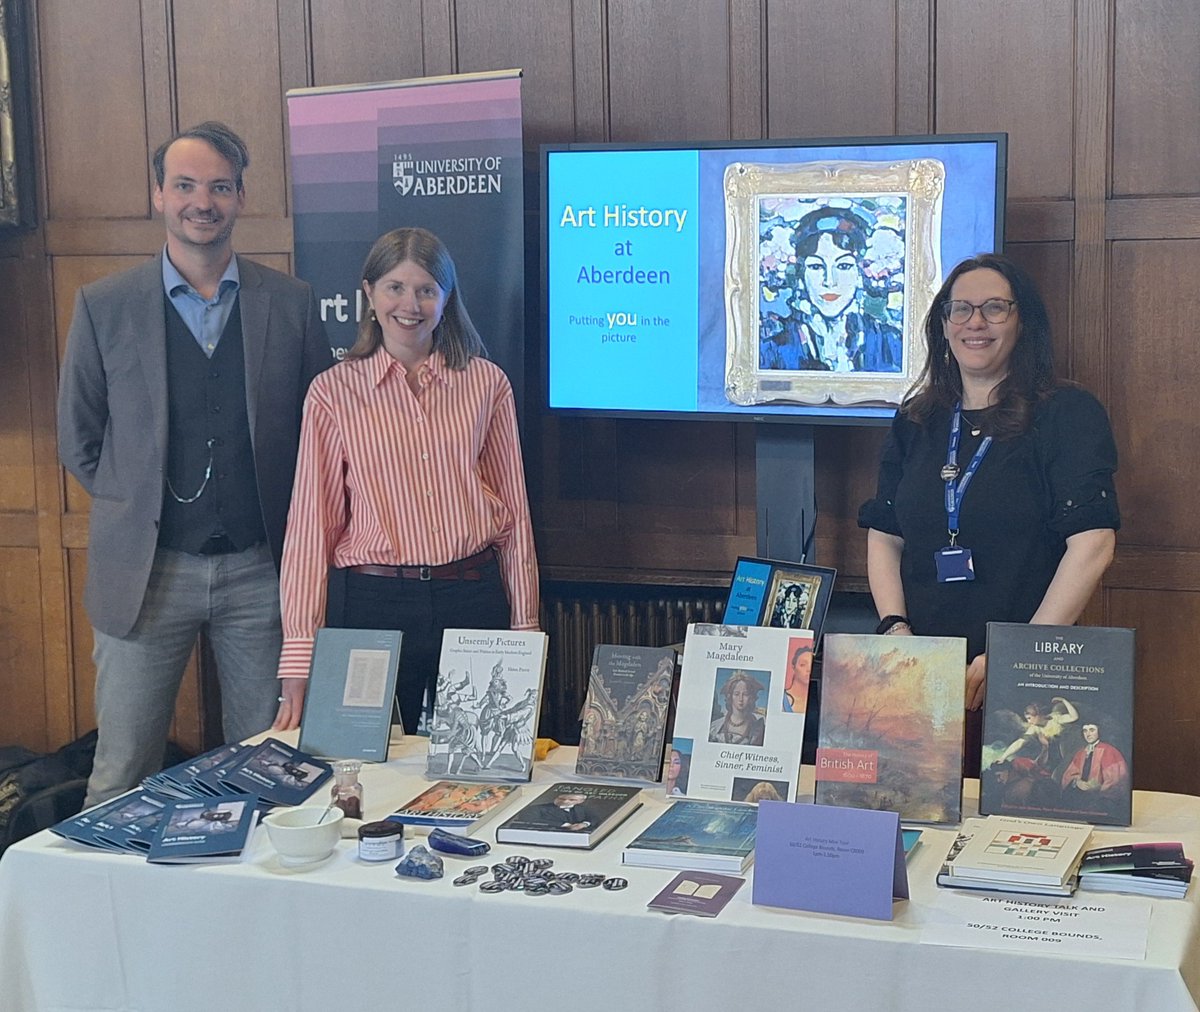 If you're at @aberdeenuni today for #OfferHolderDay, Team @abdn_arthistory is here to answer all your questions about our fantastic undergraduate degree & courses! We're in Elphinstone Hall until 1pm so don't delay! #MakeItABDN